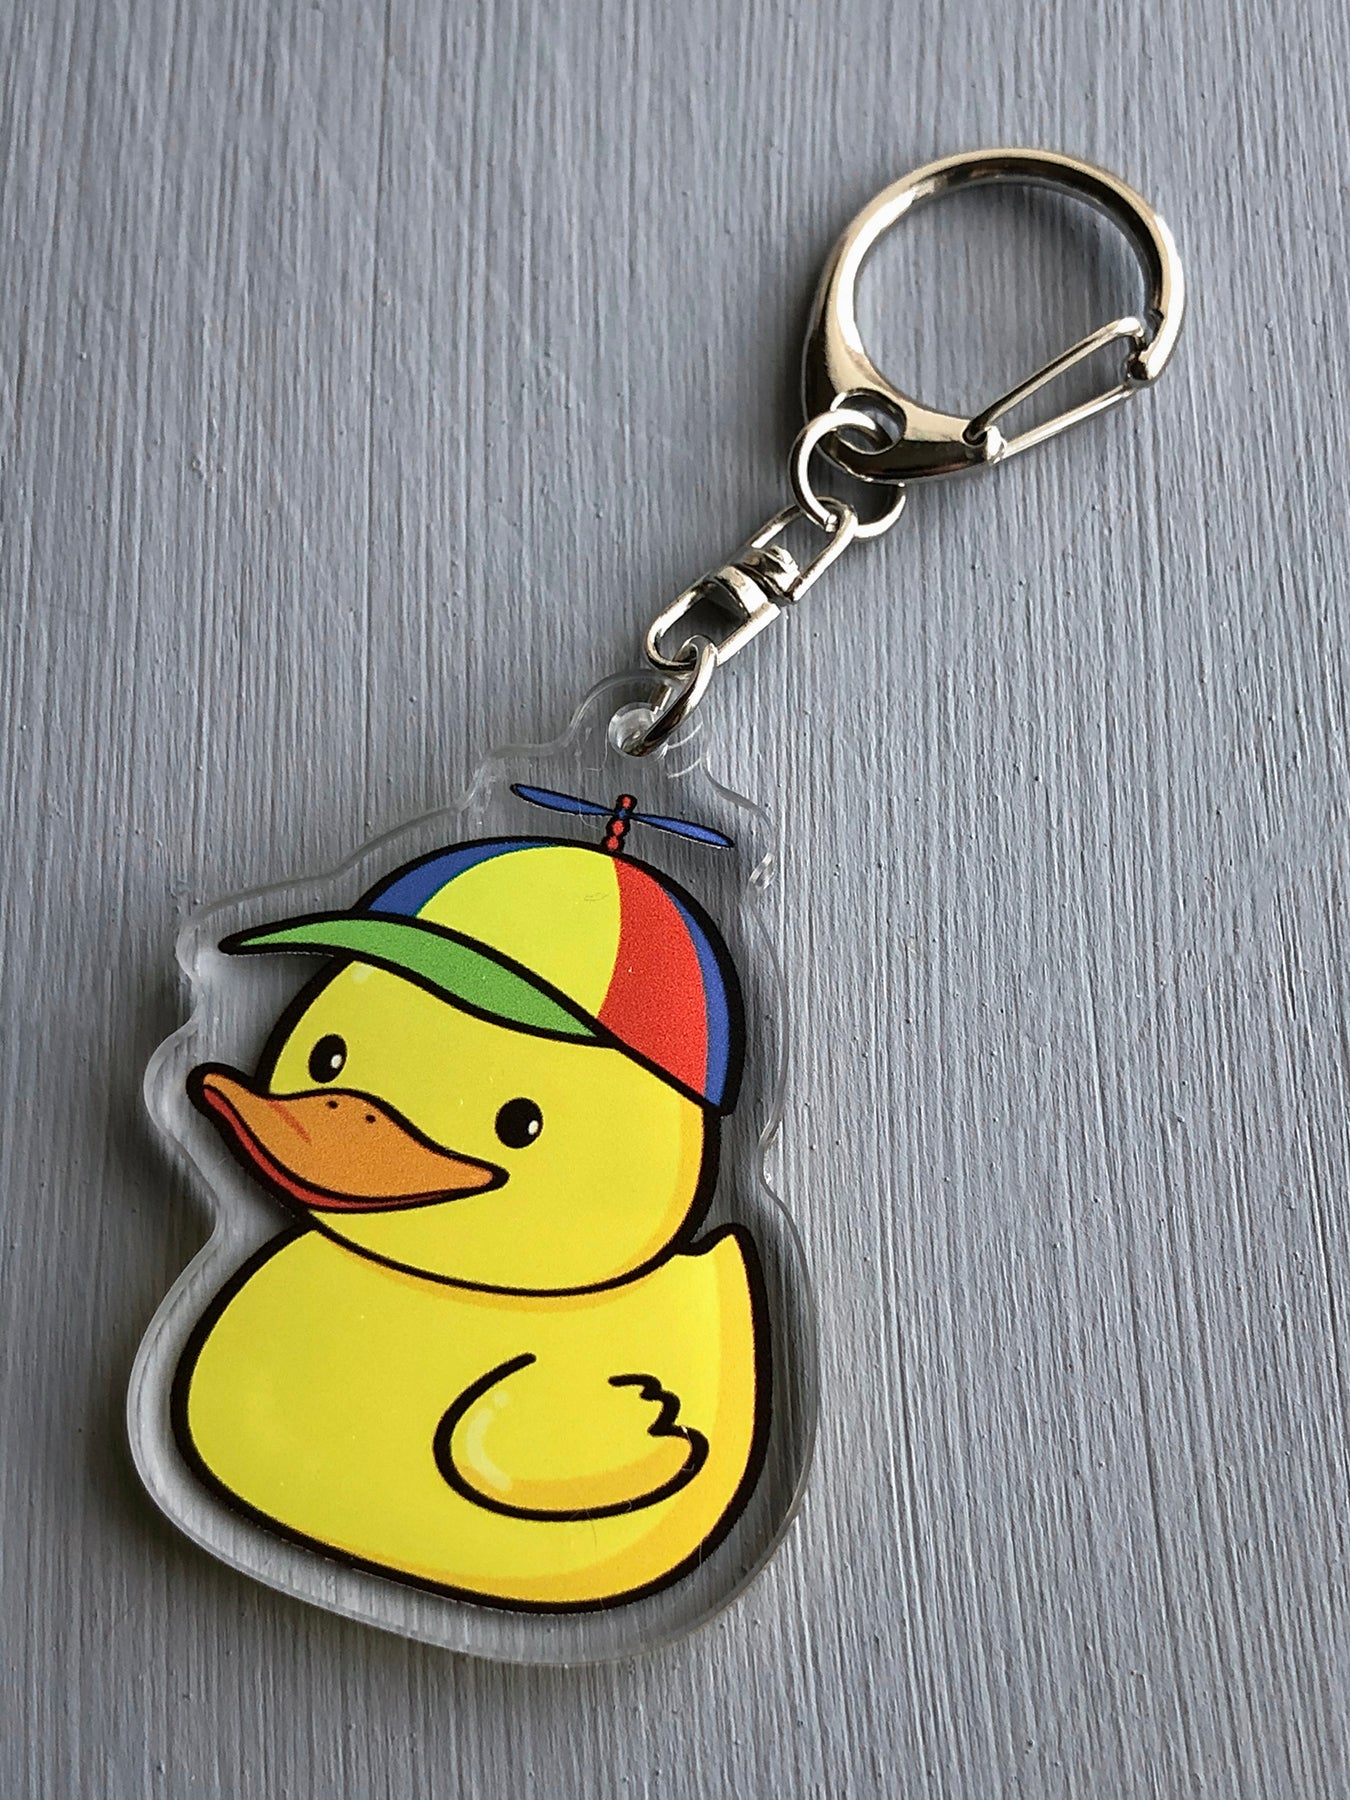 rubber ducky colorful hat propeller